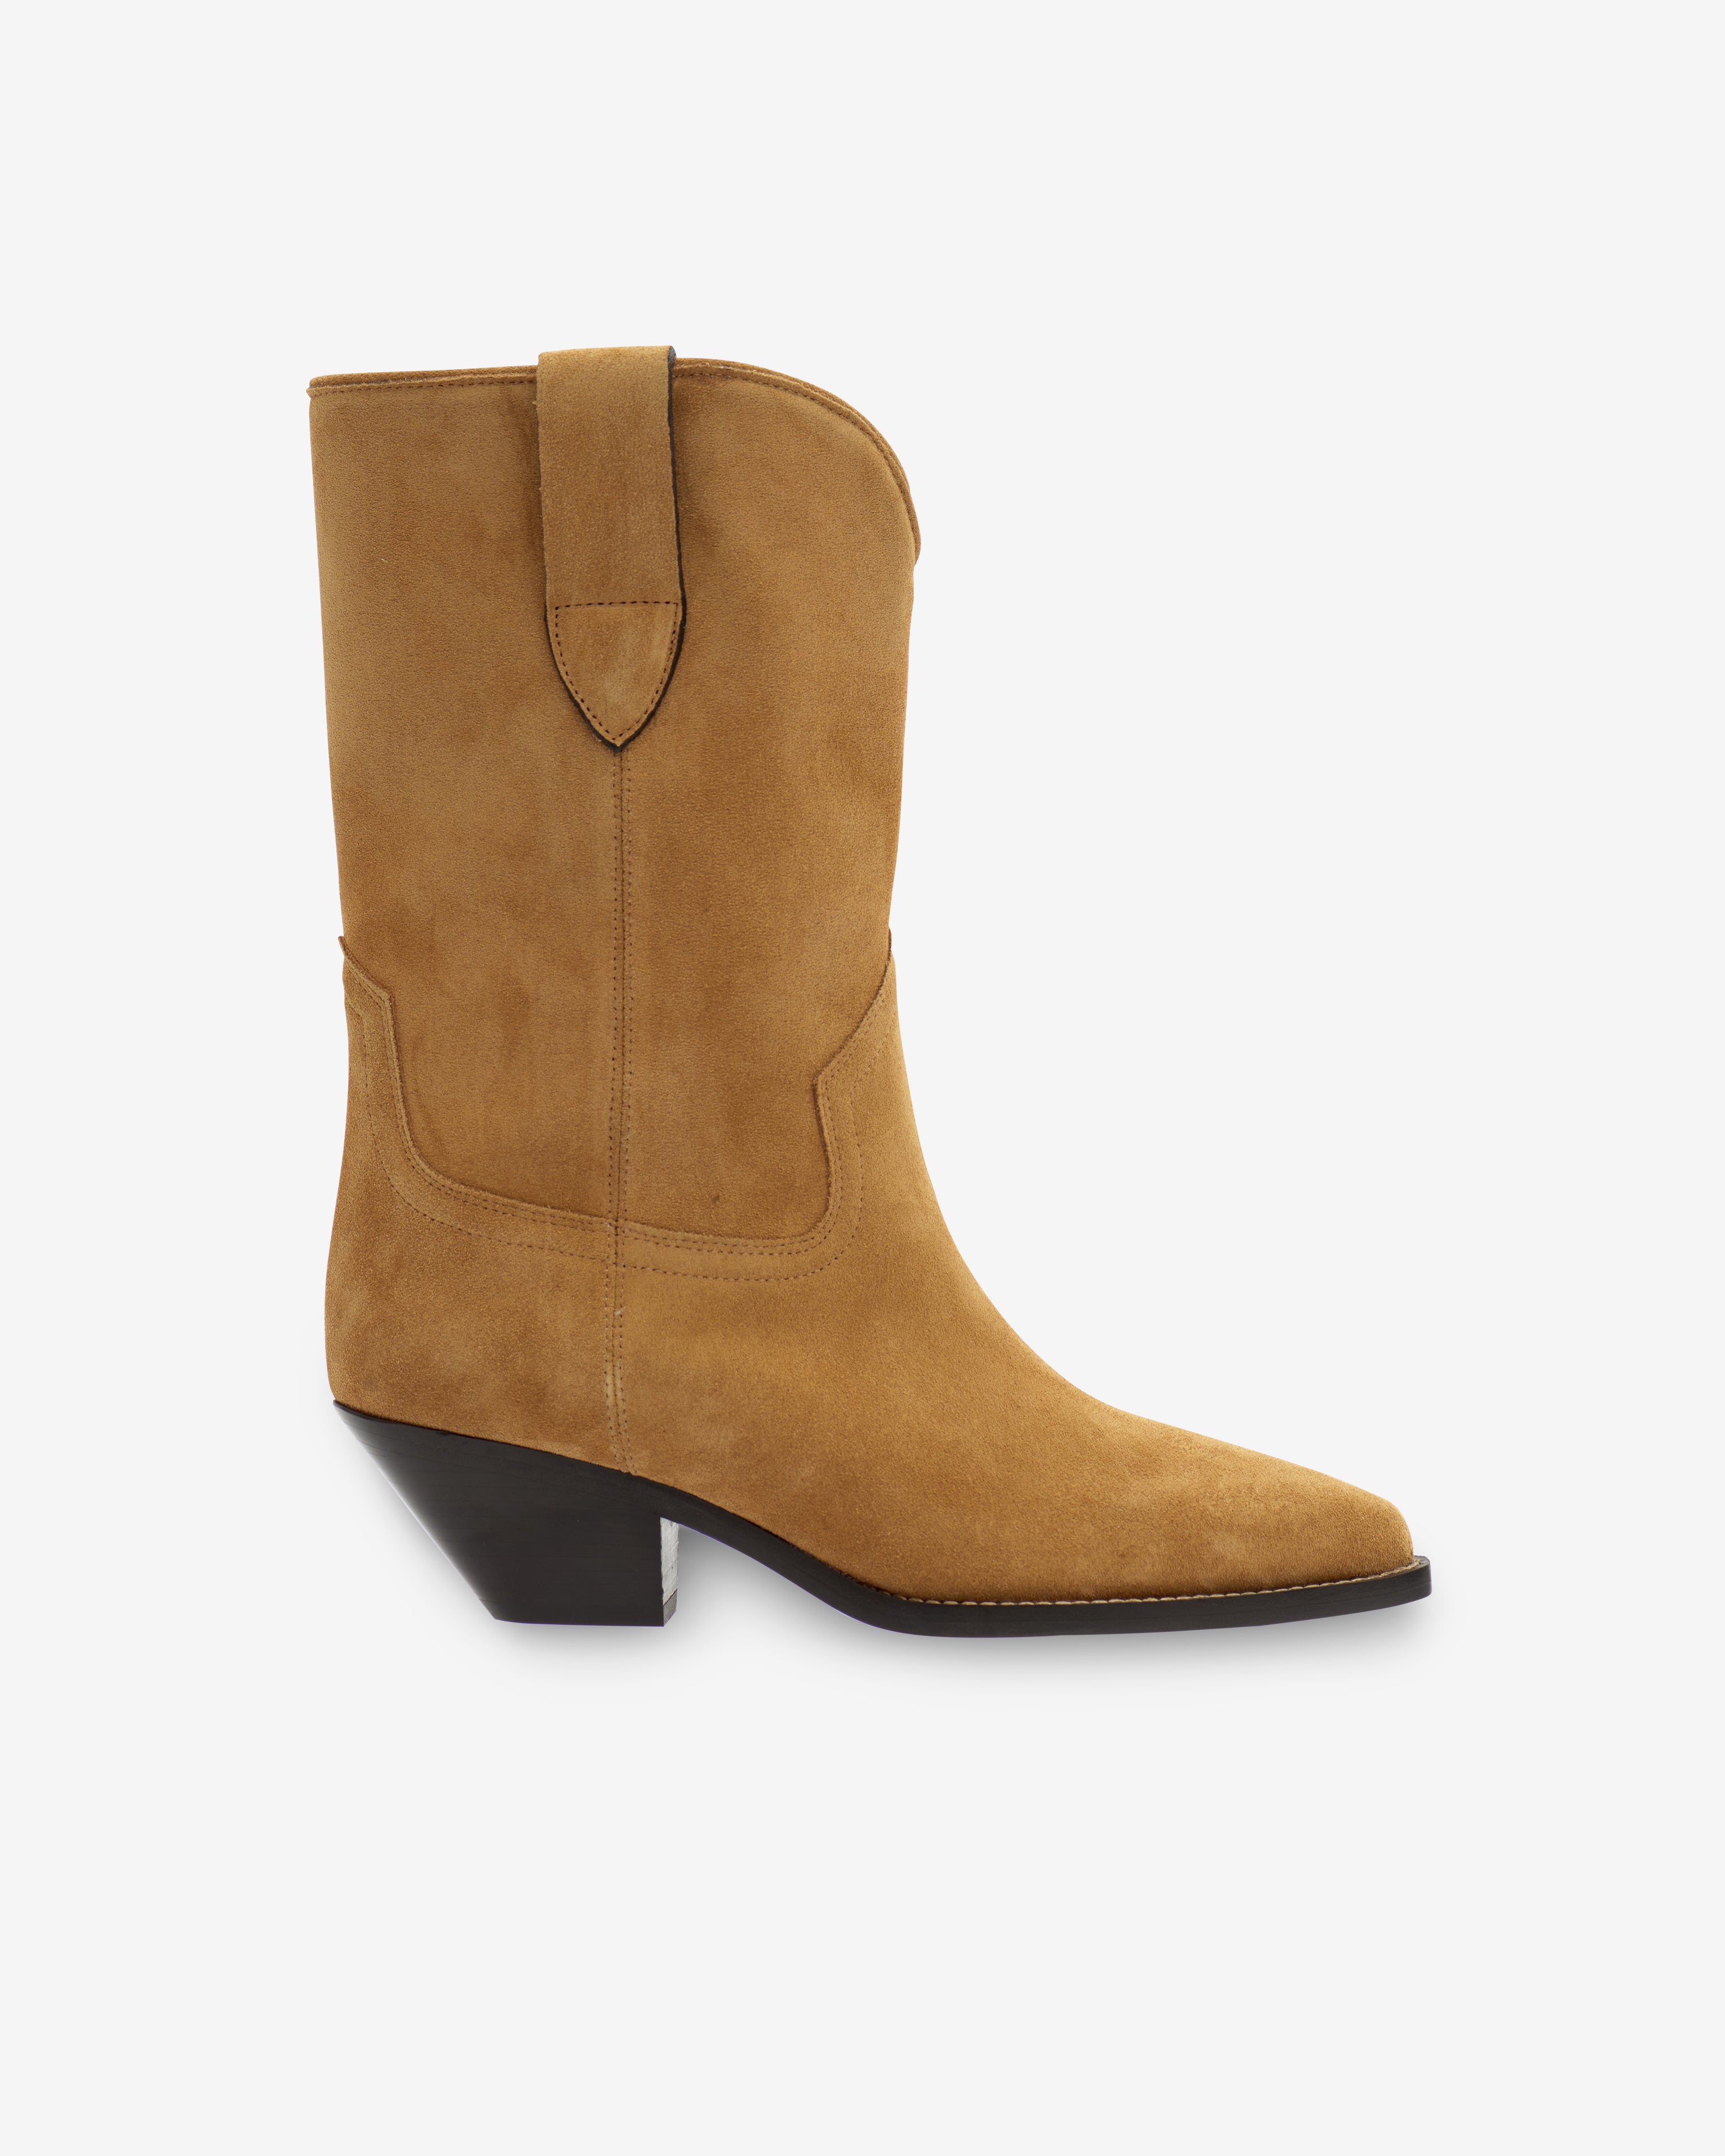 Bottes dahope Woman Taupe 4